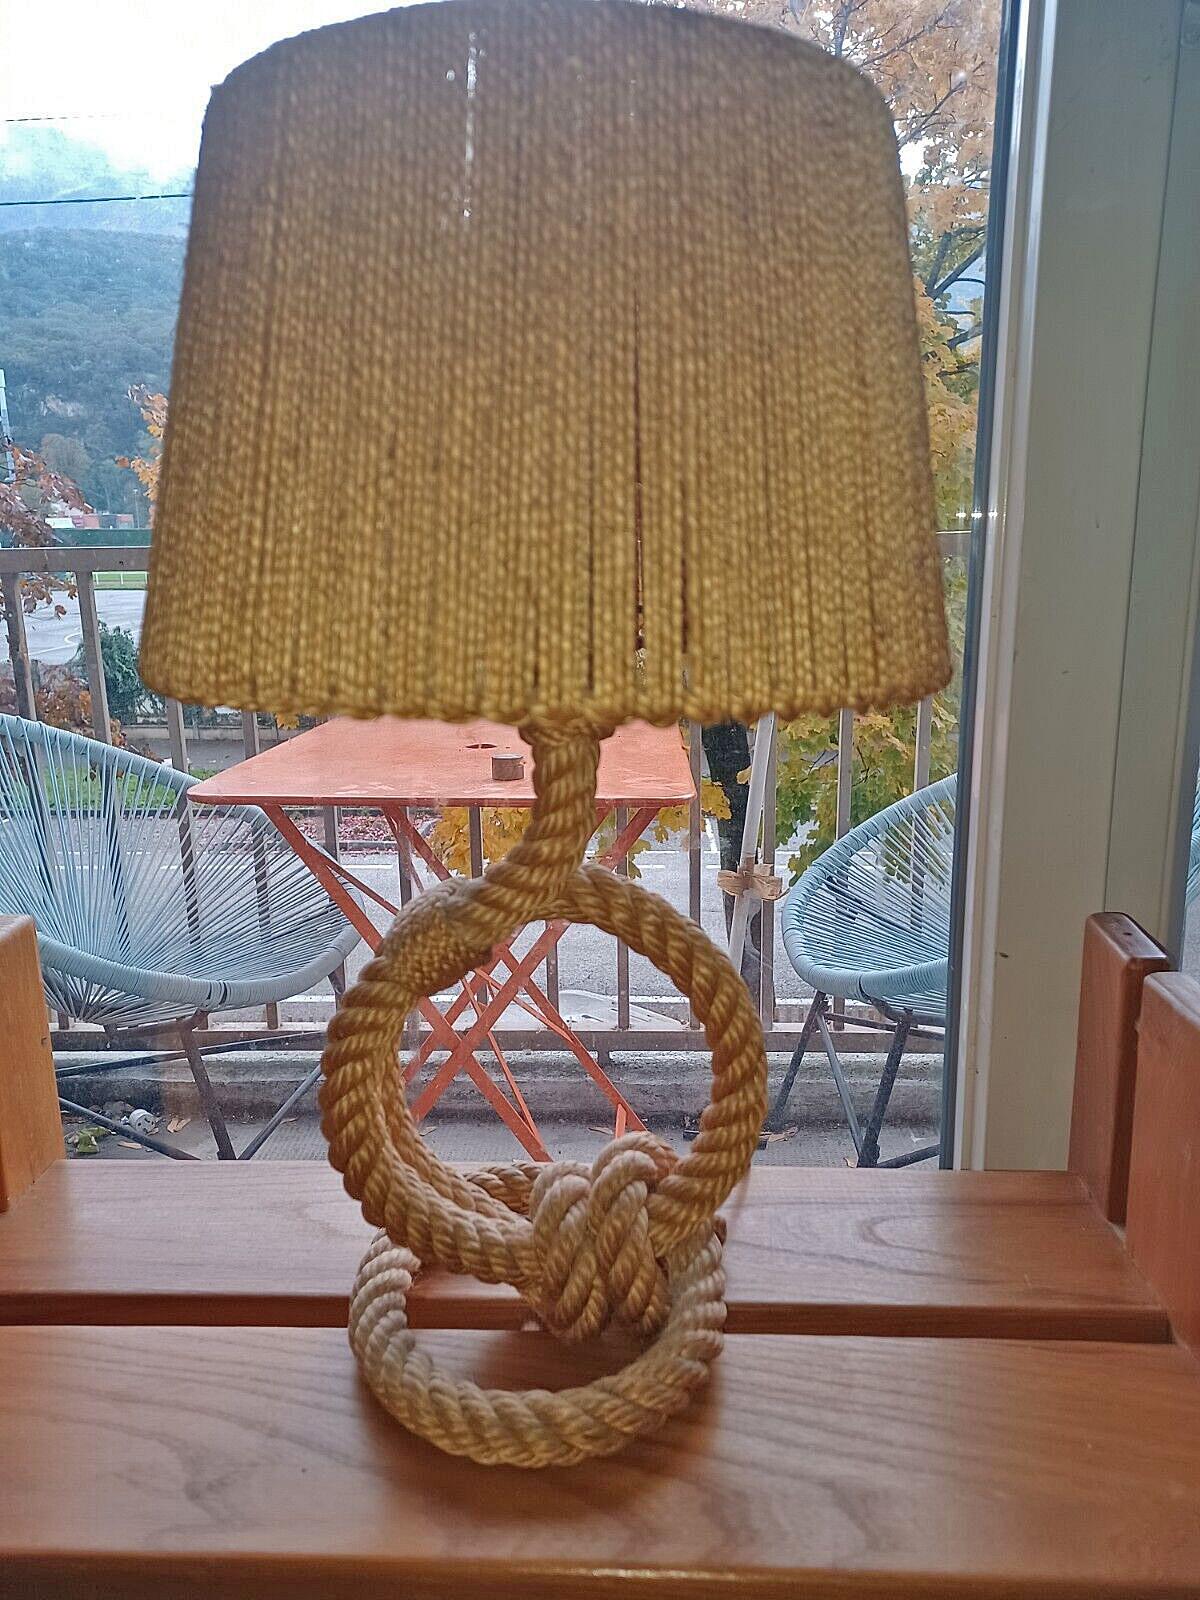 French Audoux Minet Rope Table Lamp, 1950 by Adrien Audoux and Frida Minet For Sale